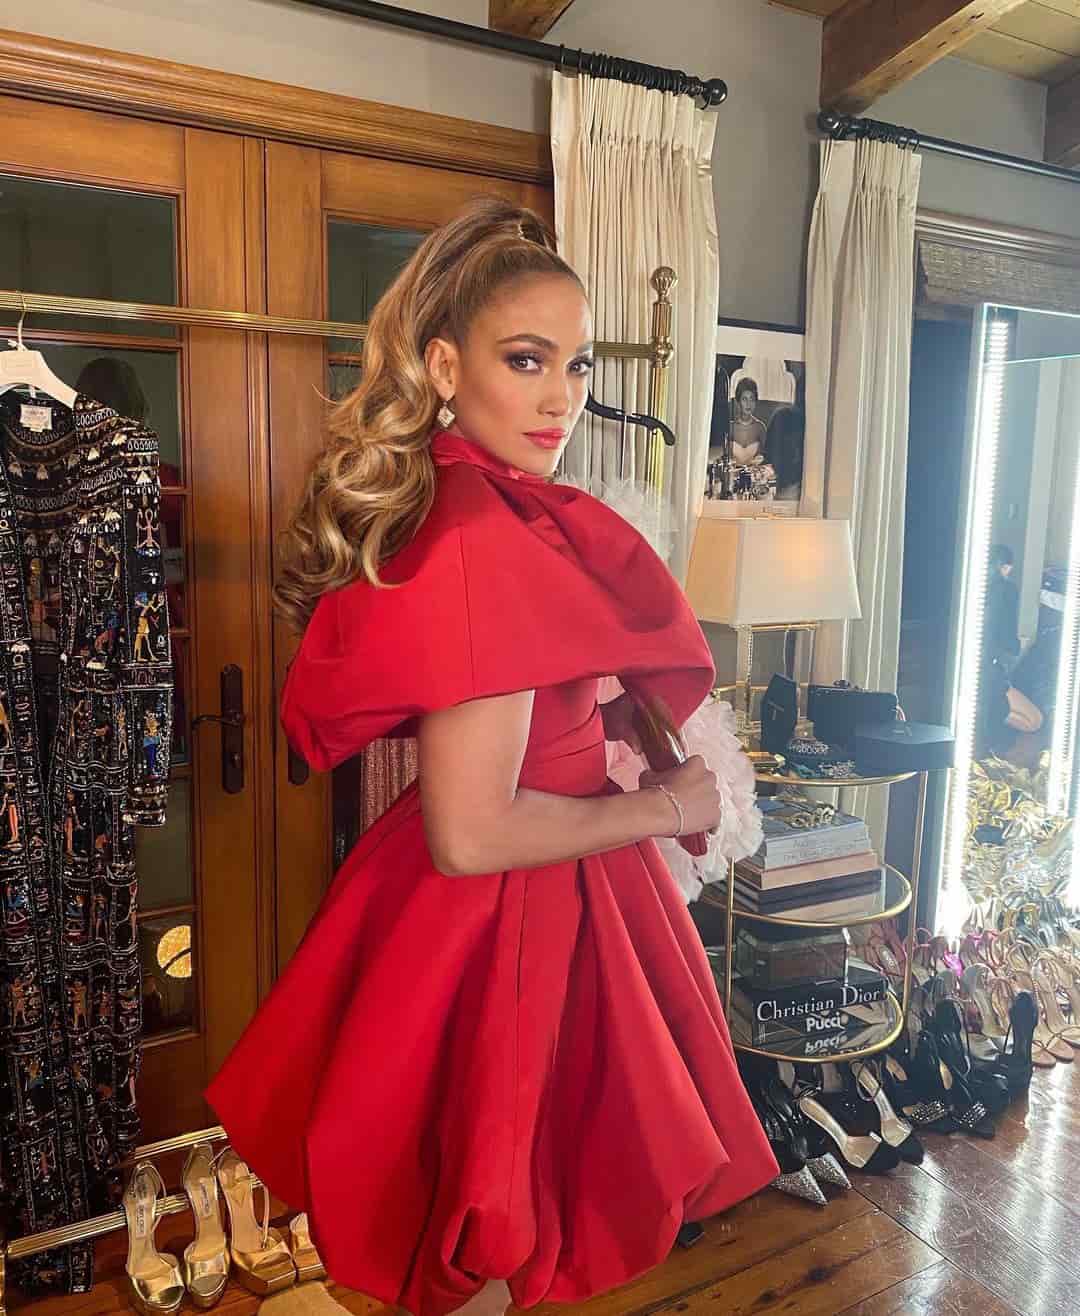 Jennifer Lopez - Biography, Profile, Facts and Career